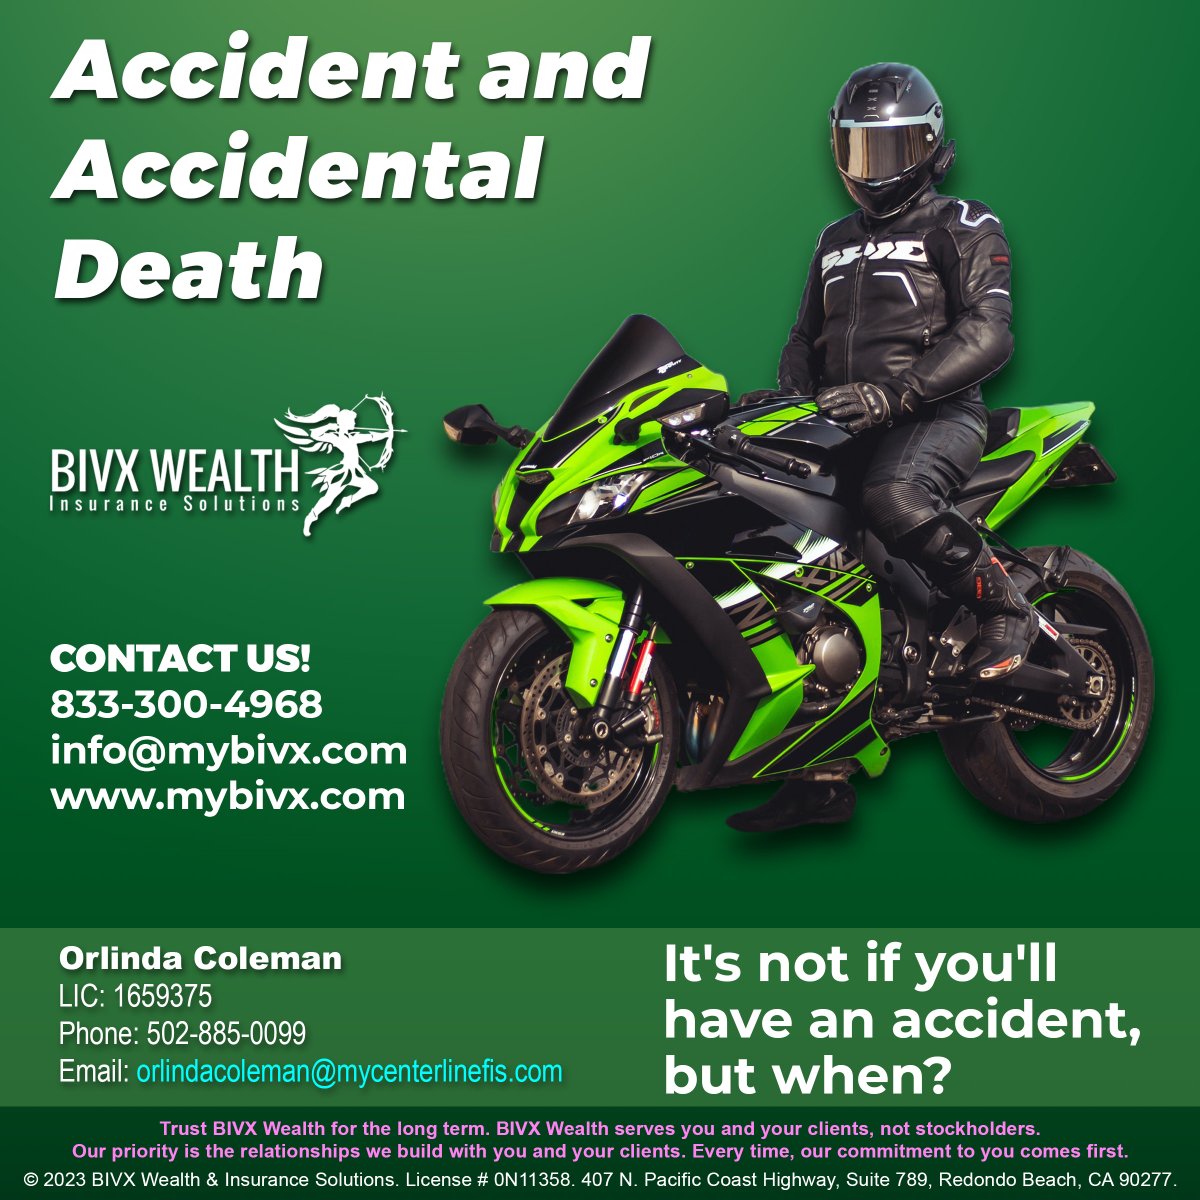 We’re here to help you understand what insurance coverage is available, and how to protect yourself from the unexpected. #BIVX #AffordableInsurance #InsuranceProtection #PeaceOfMind